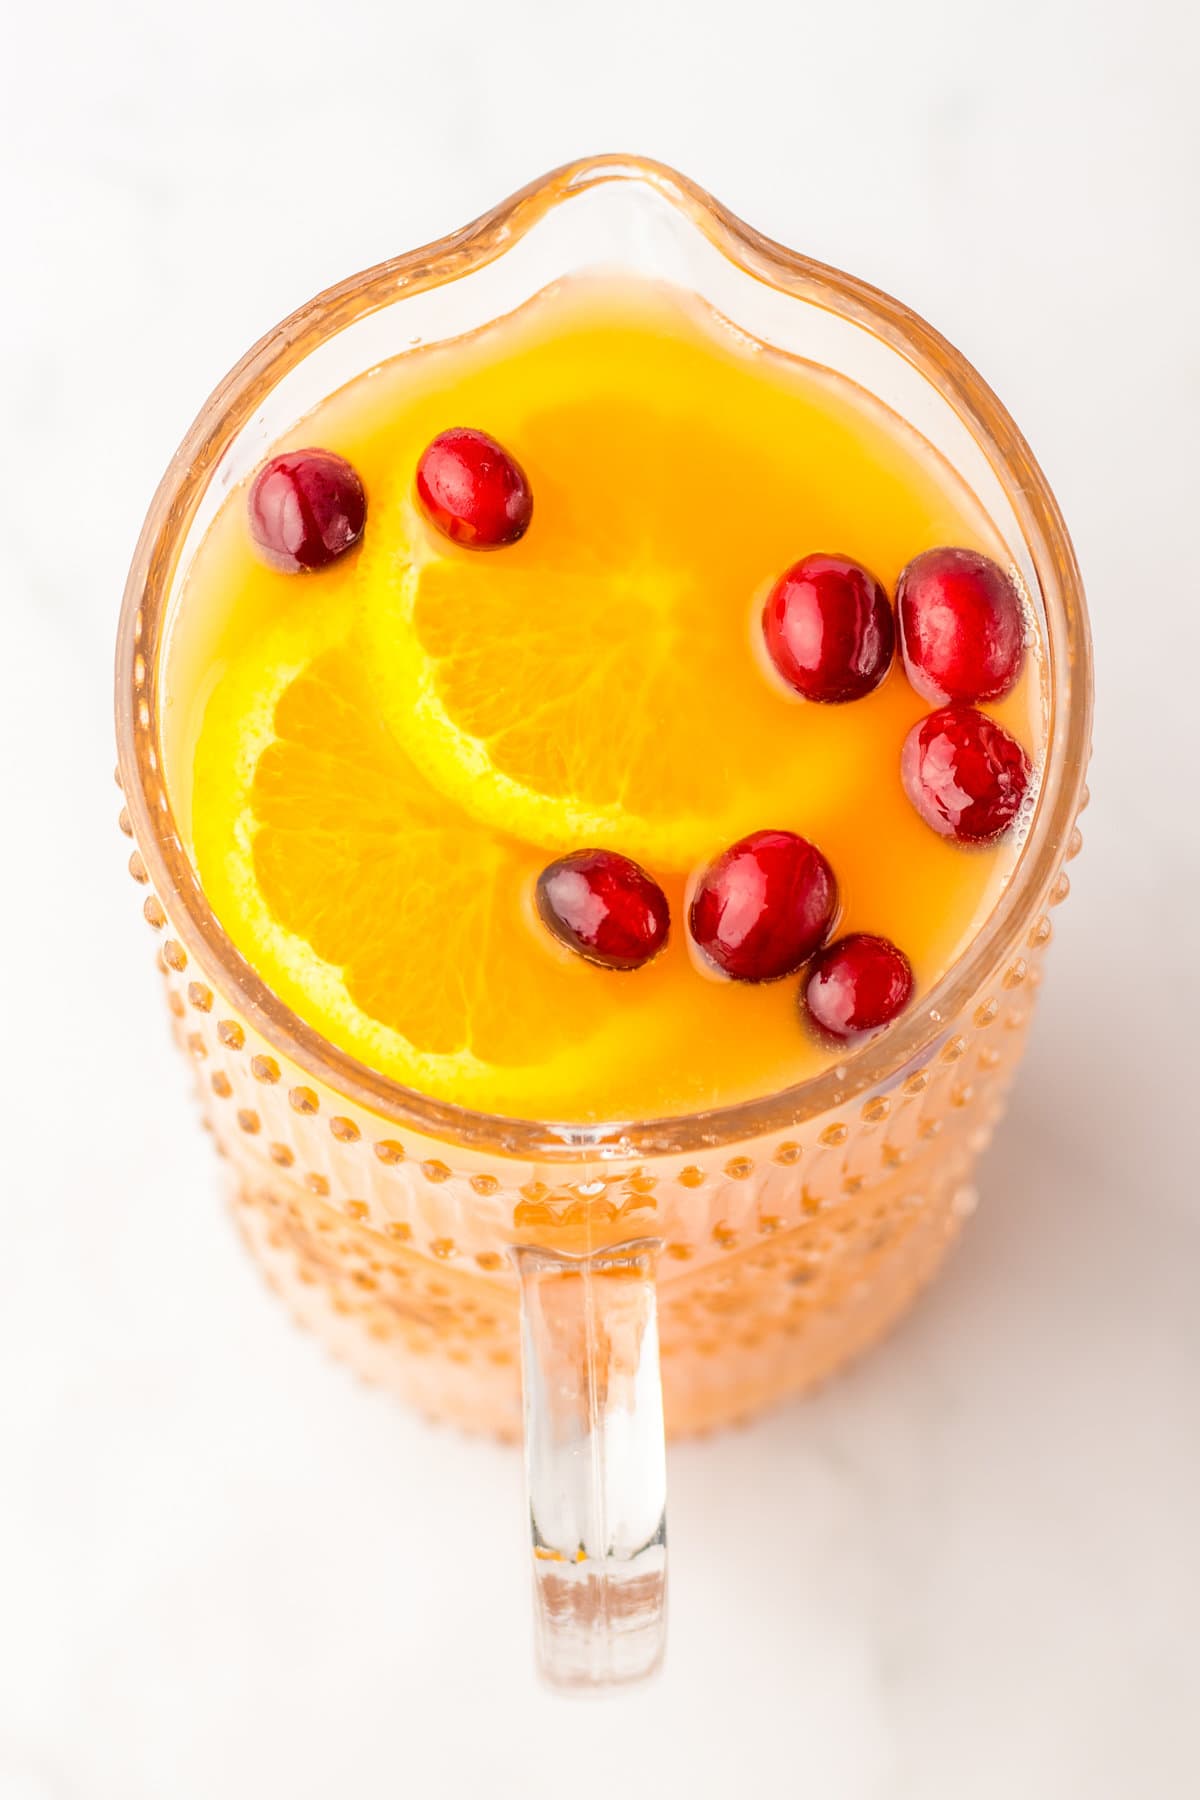 Pitcher of non alcoholic punch with cranberries and orange slices.